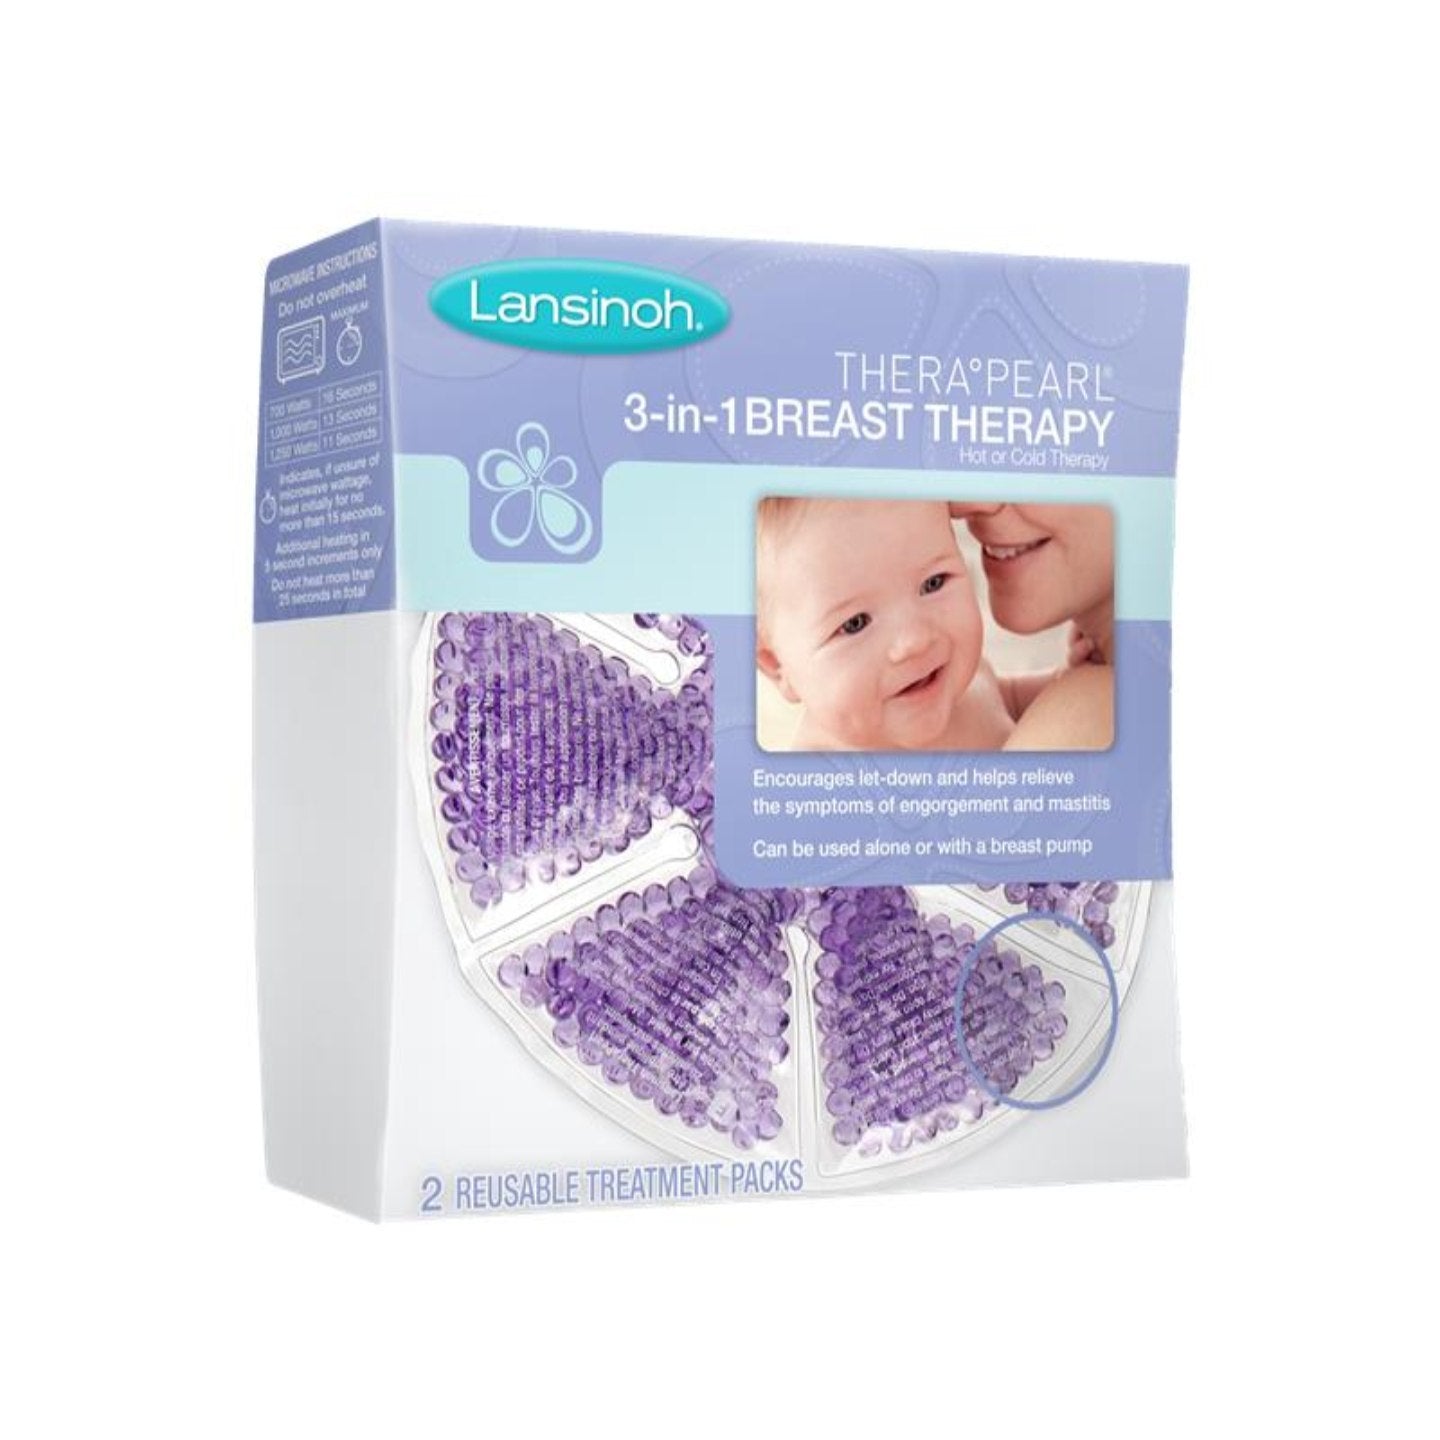 Lansinoh Therapearl 3 In 1 Hot Or Cold Breast Therapy 